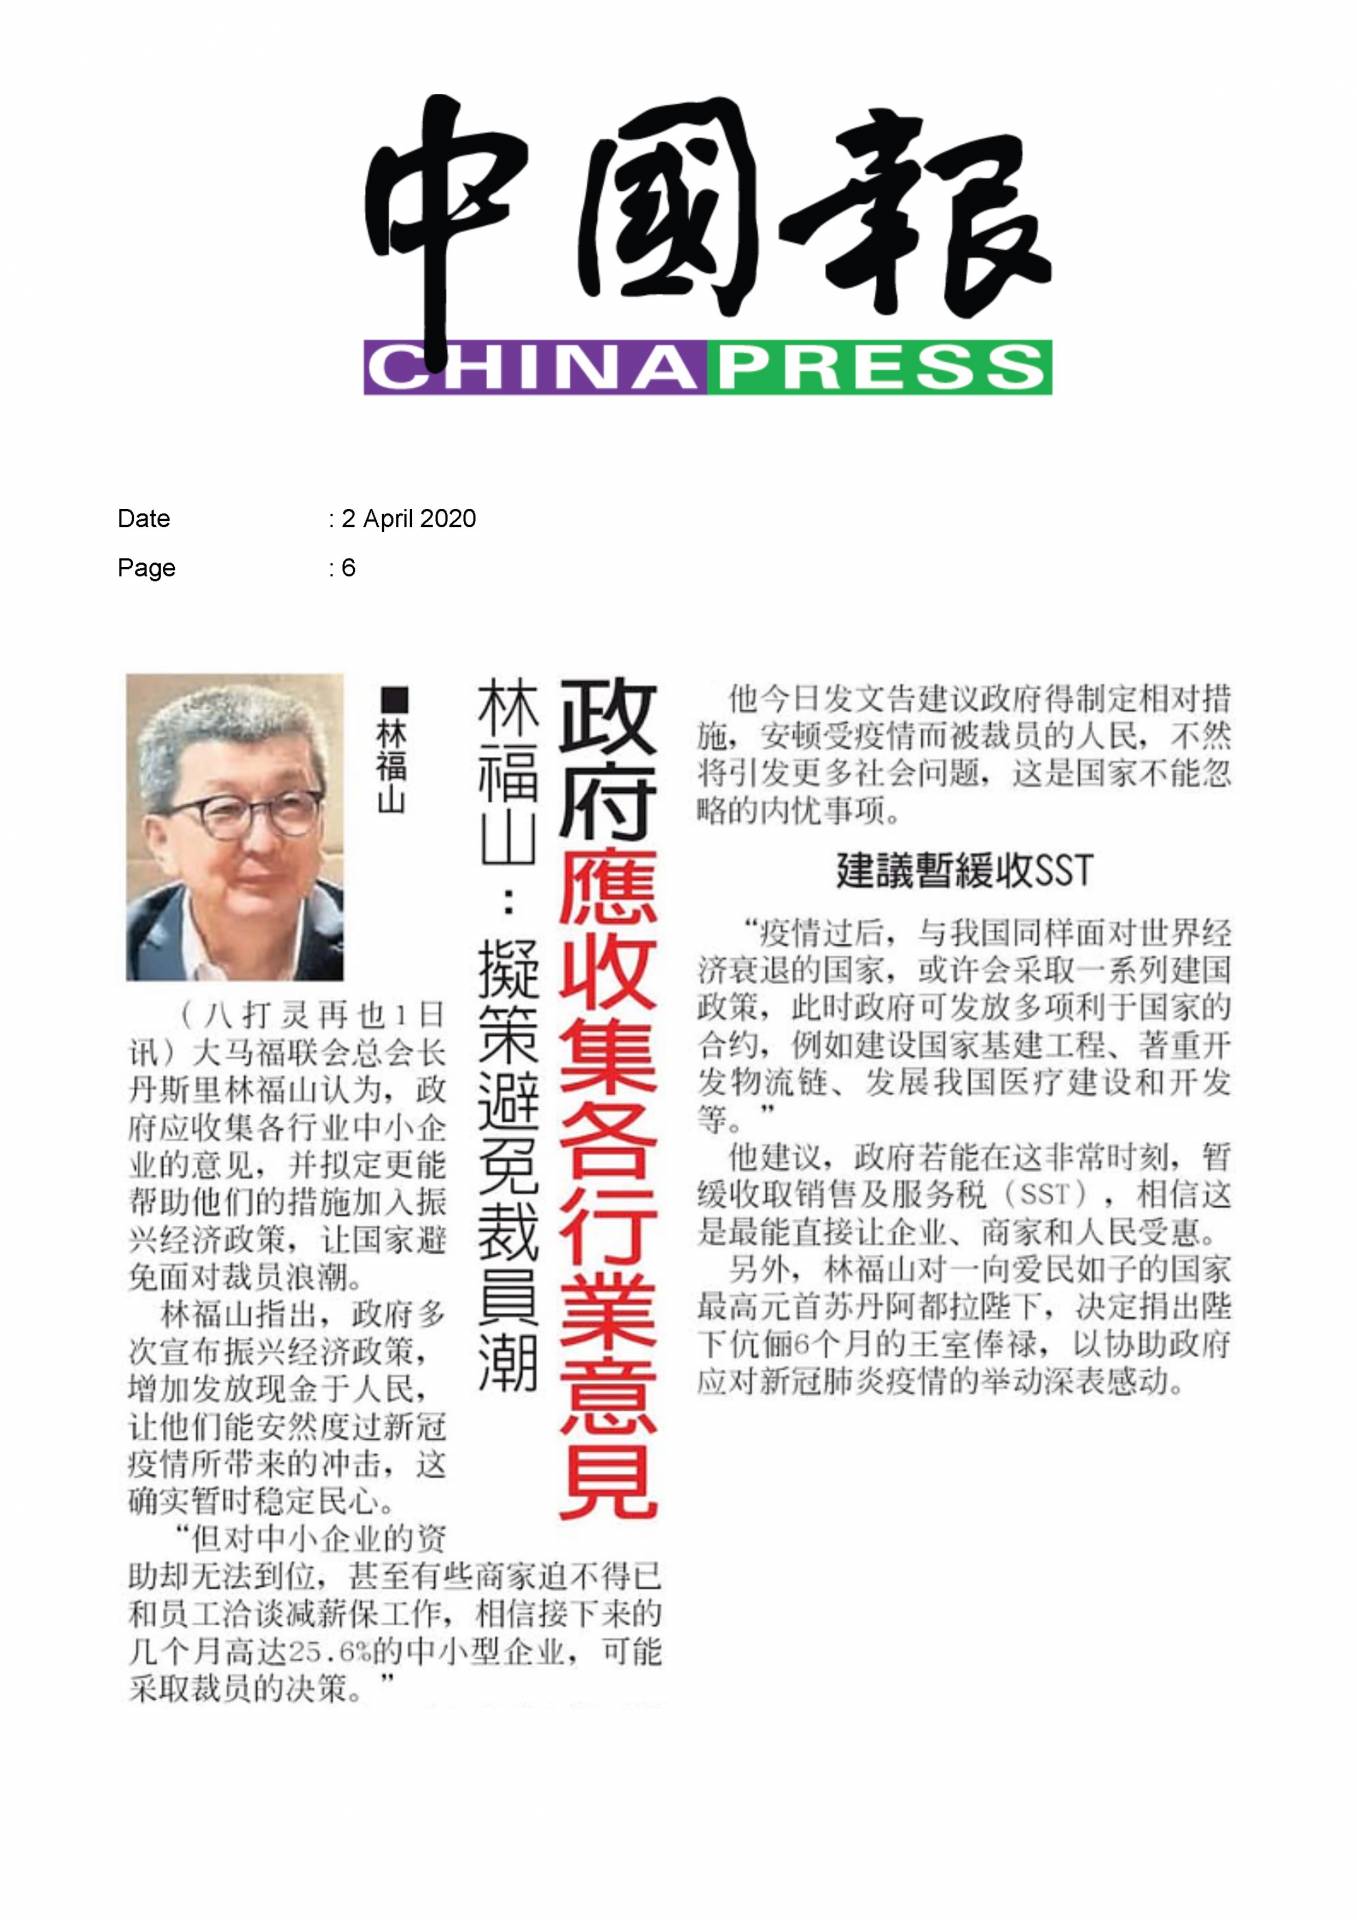 2020.04.02 China Press - Government should collect opinions from various industries